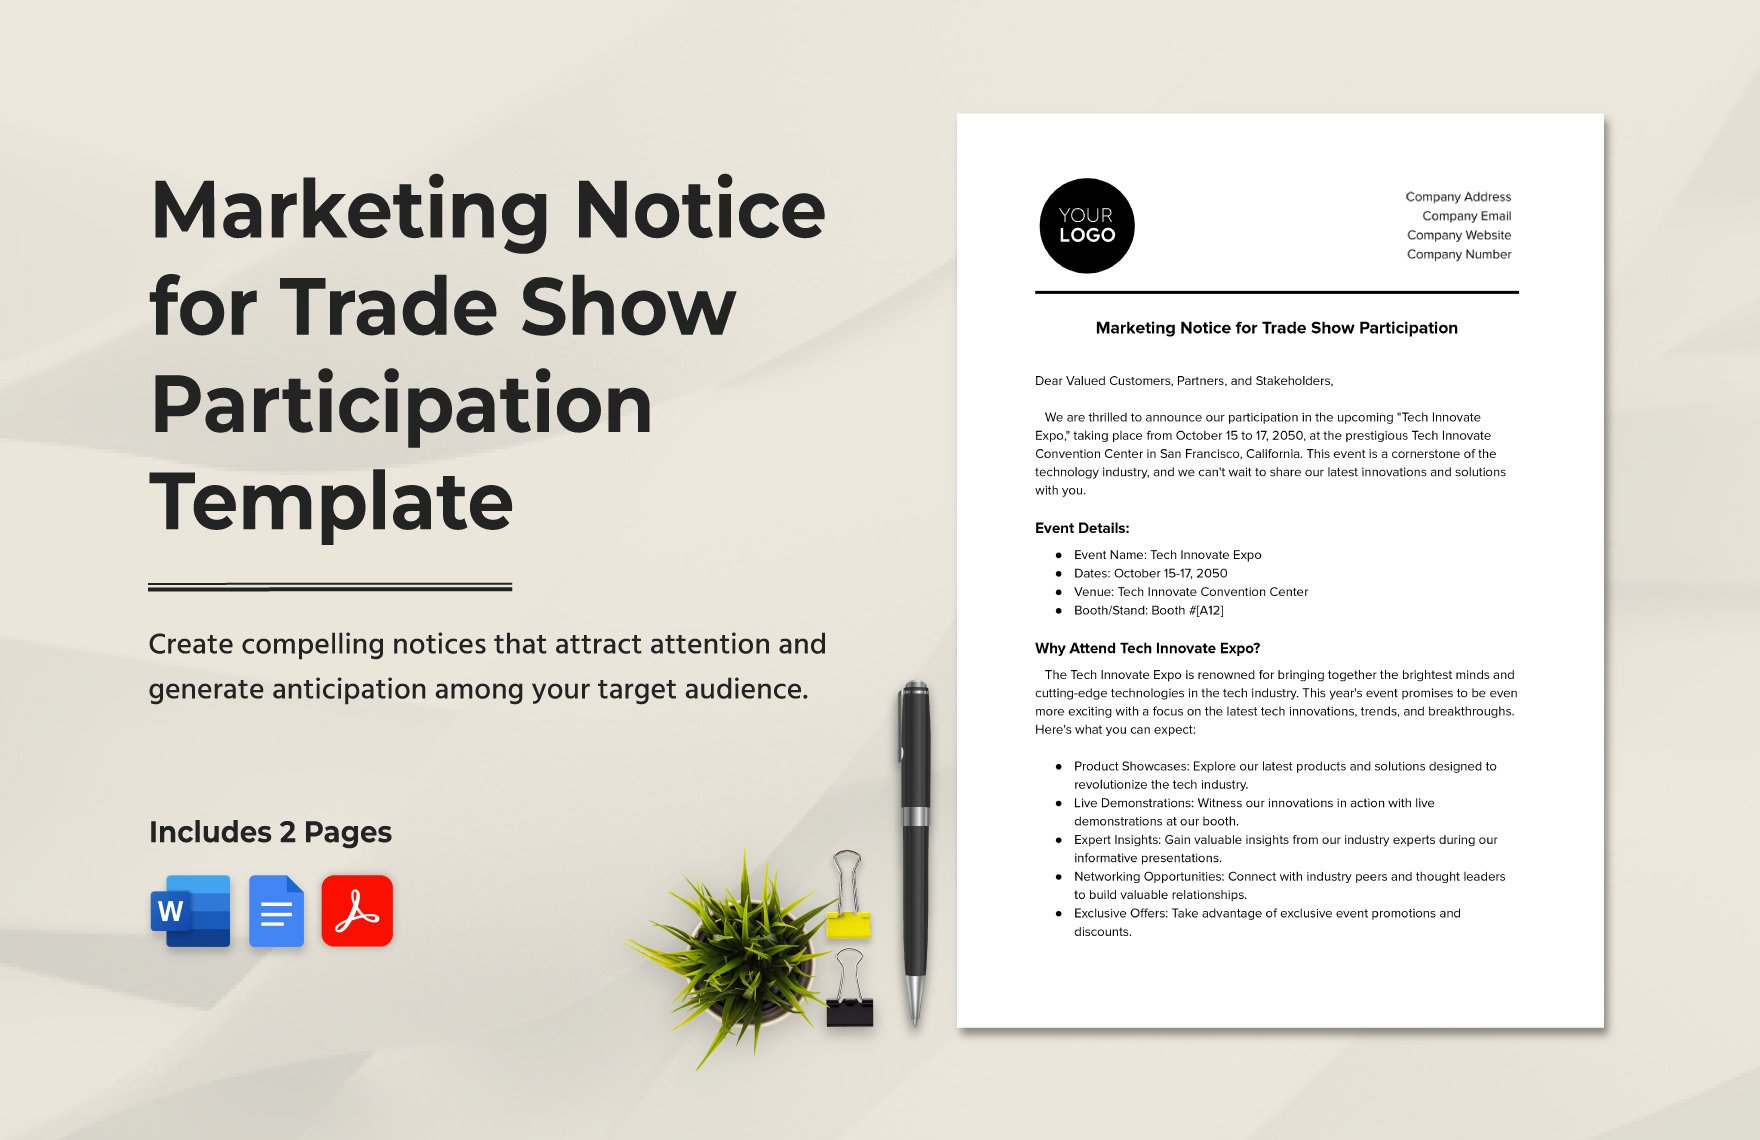 Marketing Notice for Trade Show Participation Template in Word, Google Docs, PDF